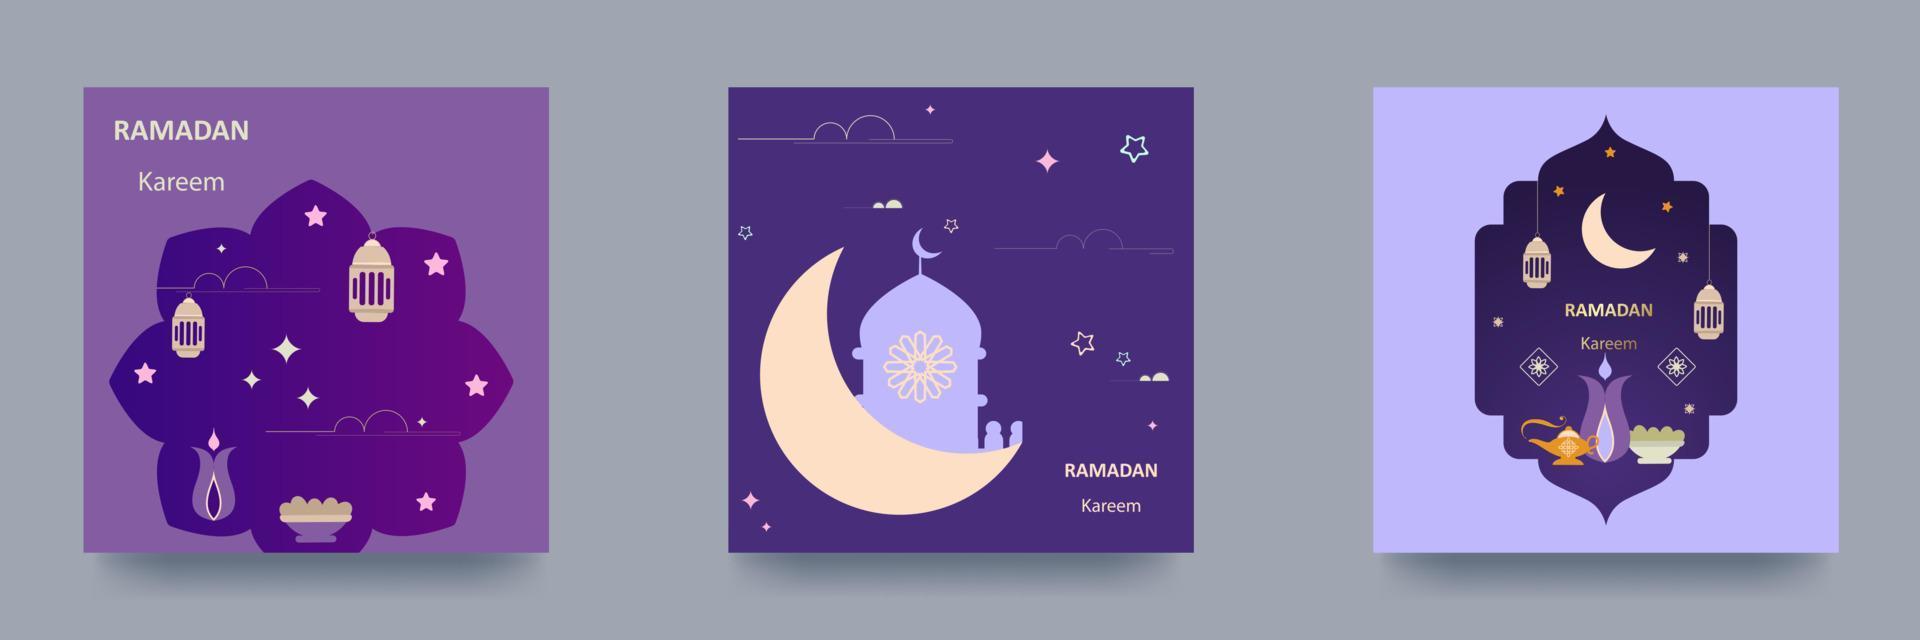 Ramadan Kareem Set of posters, holiday covers, flyers. Modern design in pastel colors with a mosque, crescent moon, traditional patterns, arched windows. Vector illustration